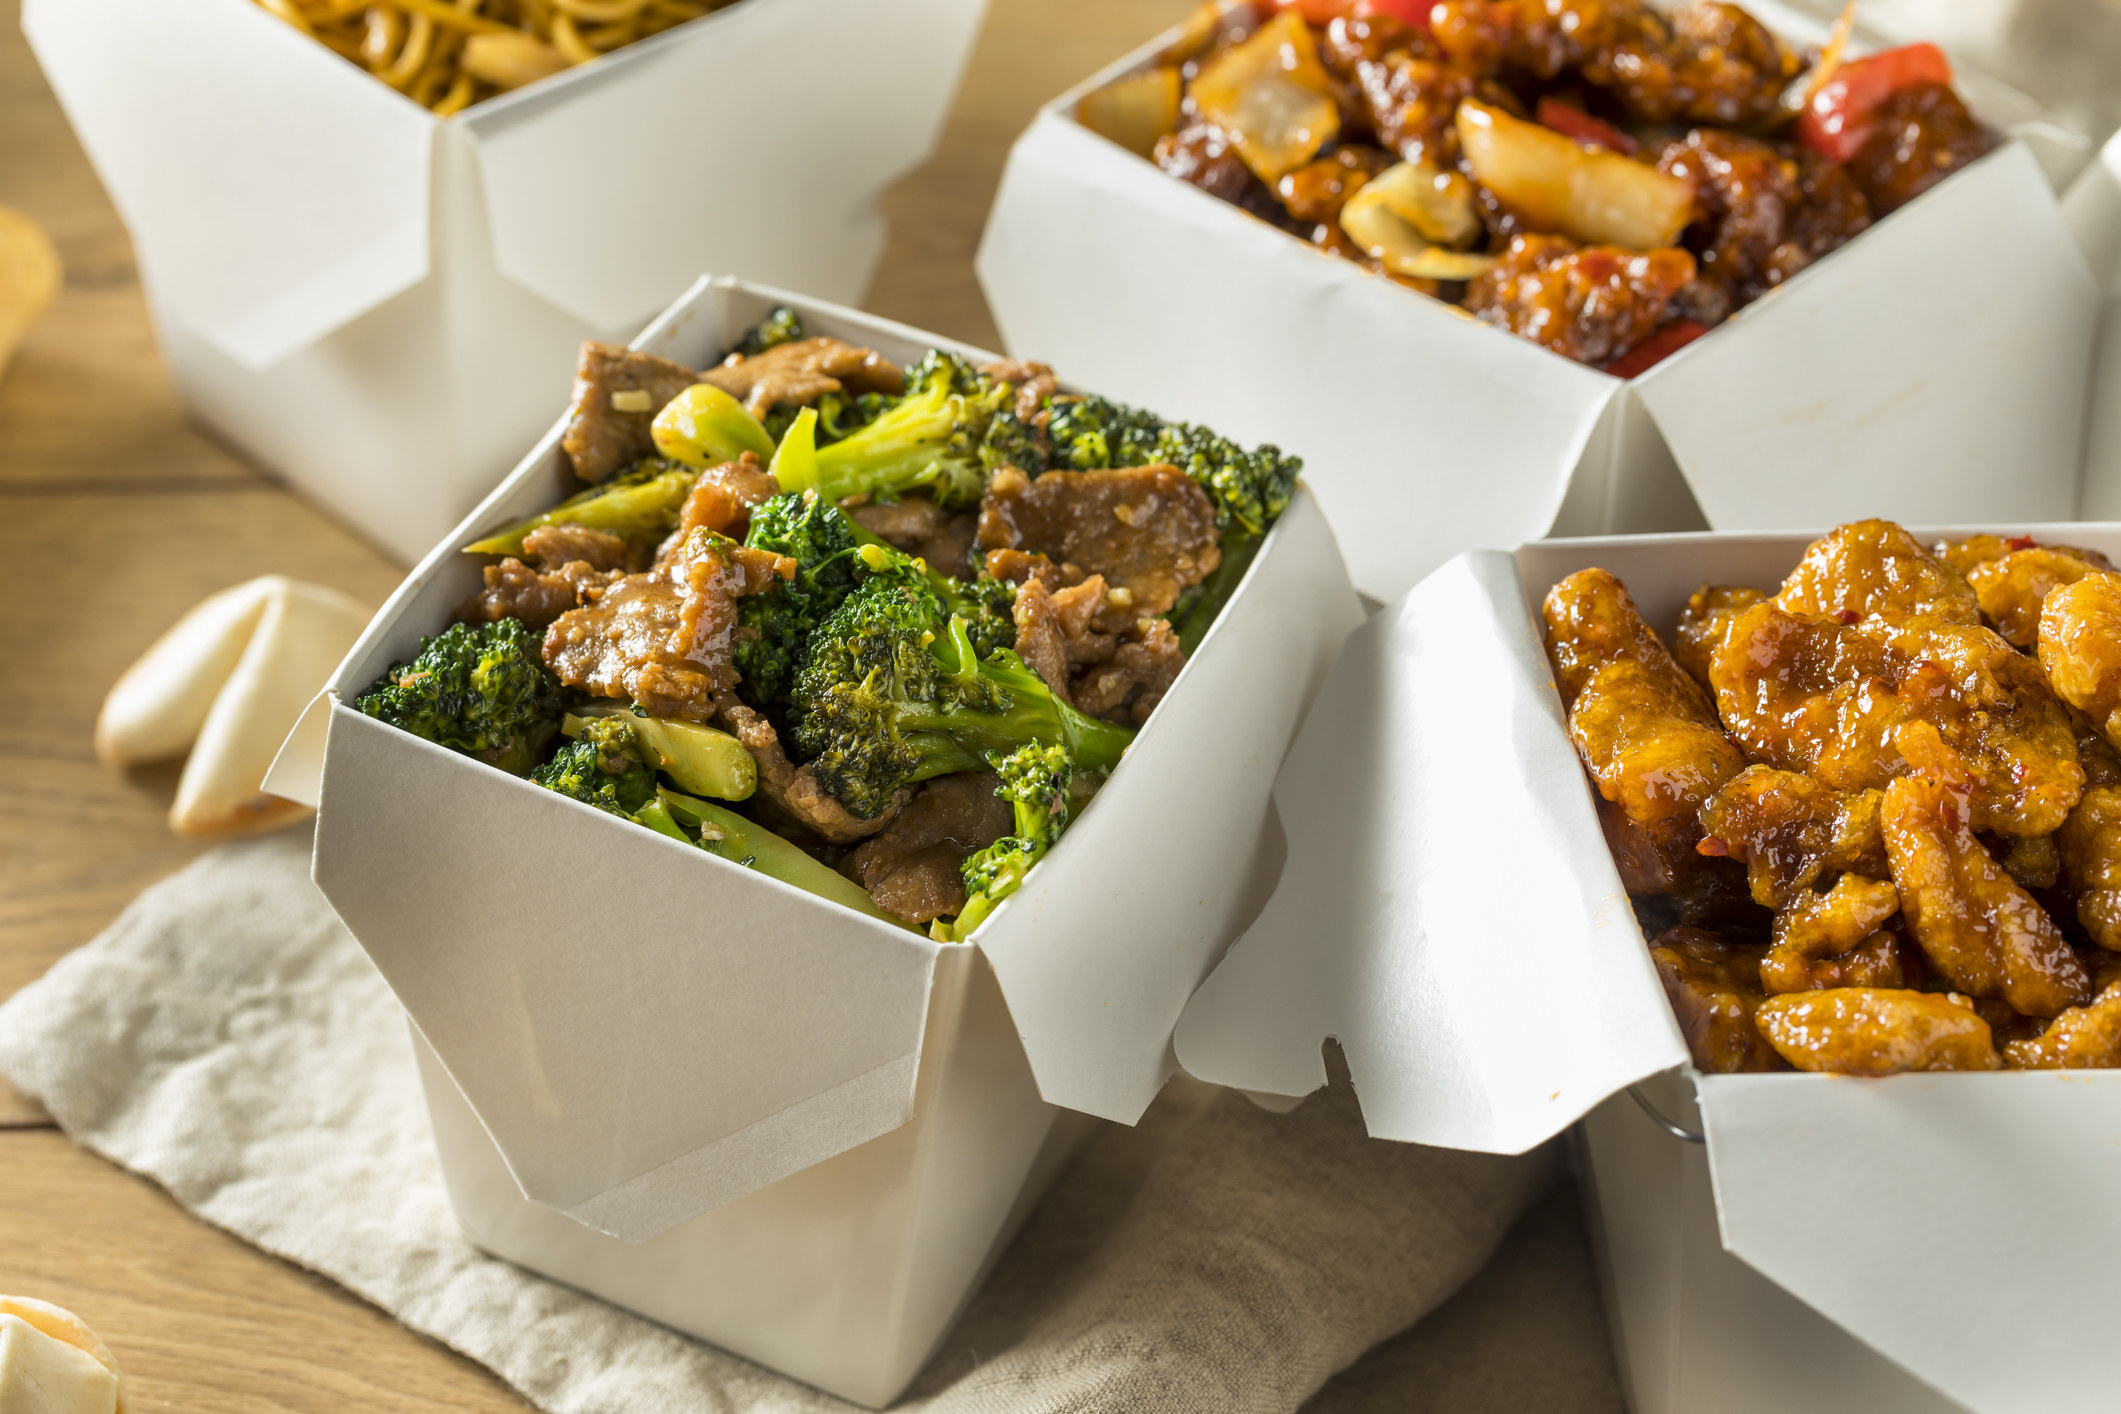 Take-out boxes of Chinese food.